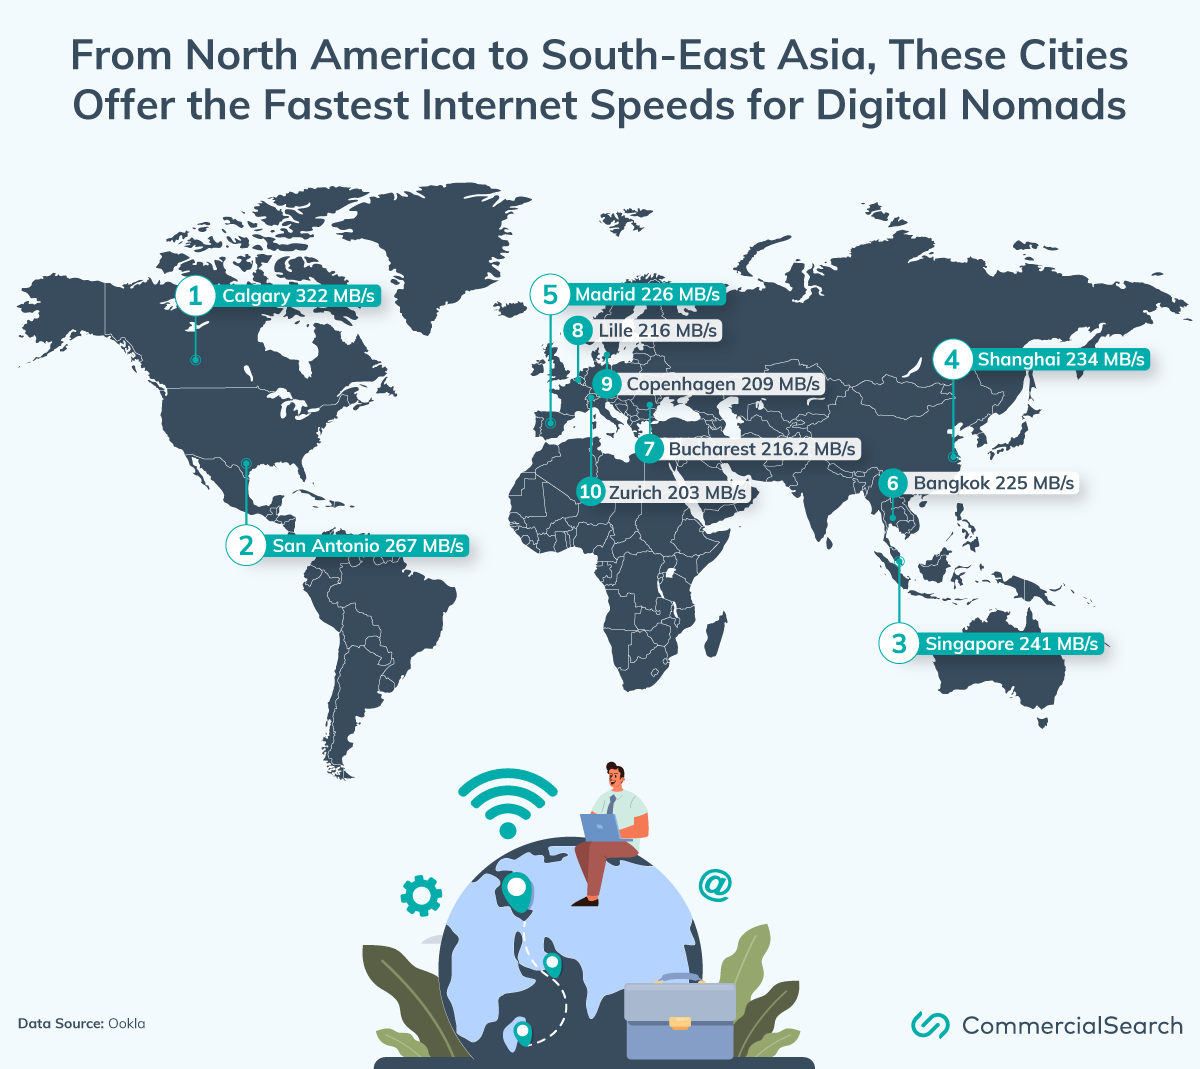 Digital nomad destinations with the fastest internet